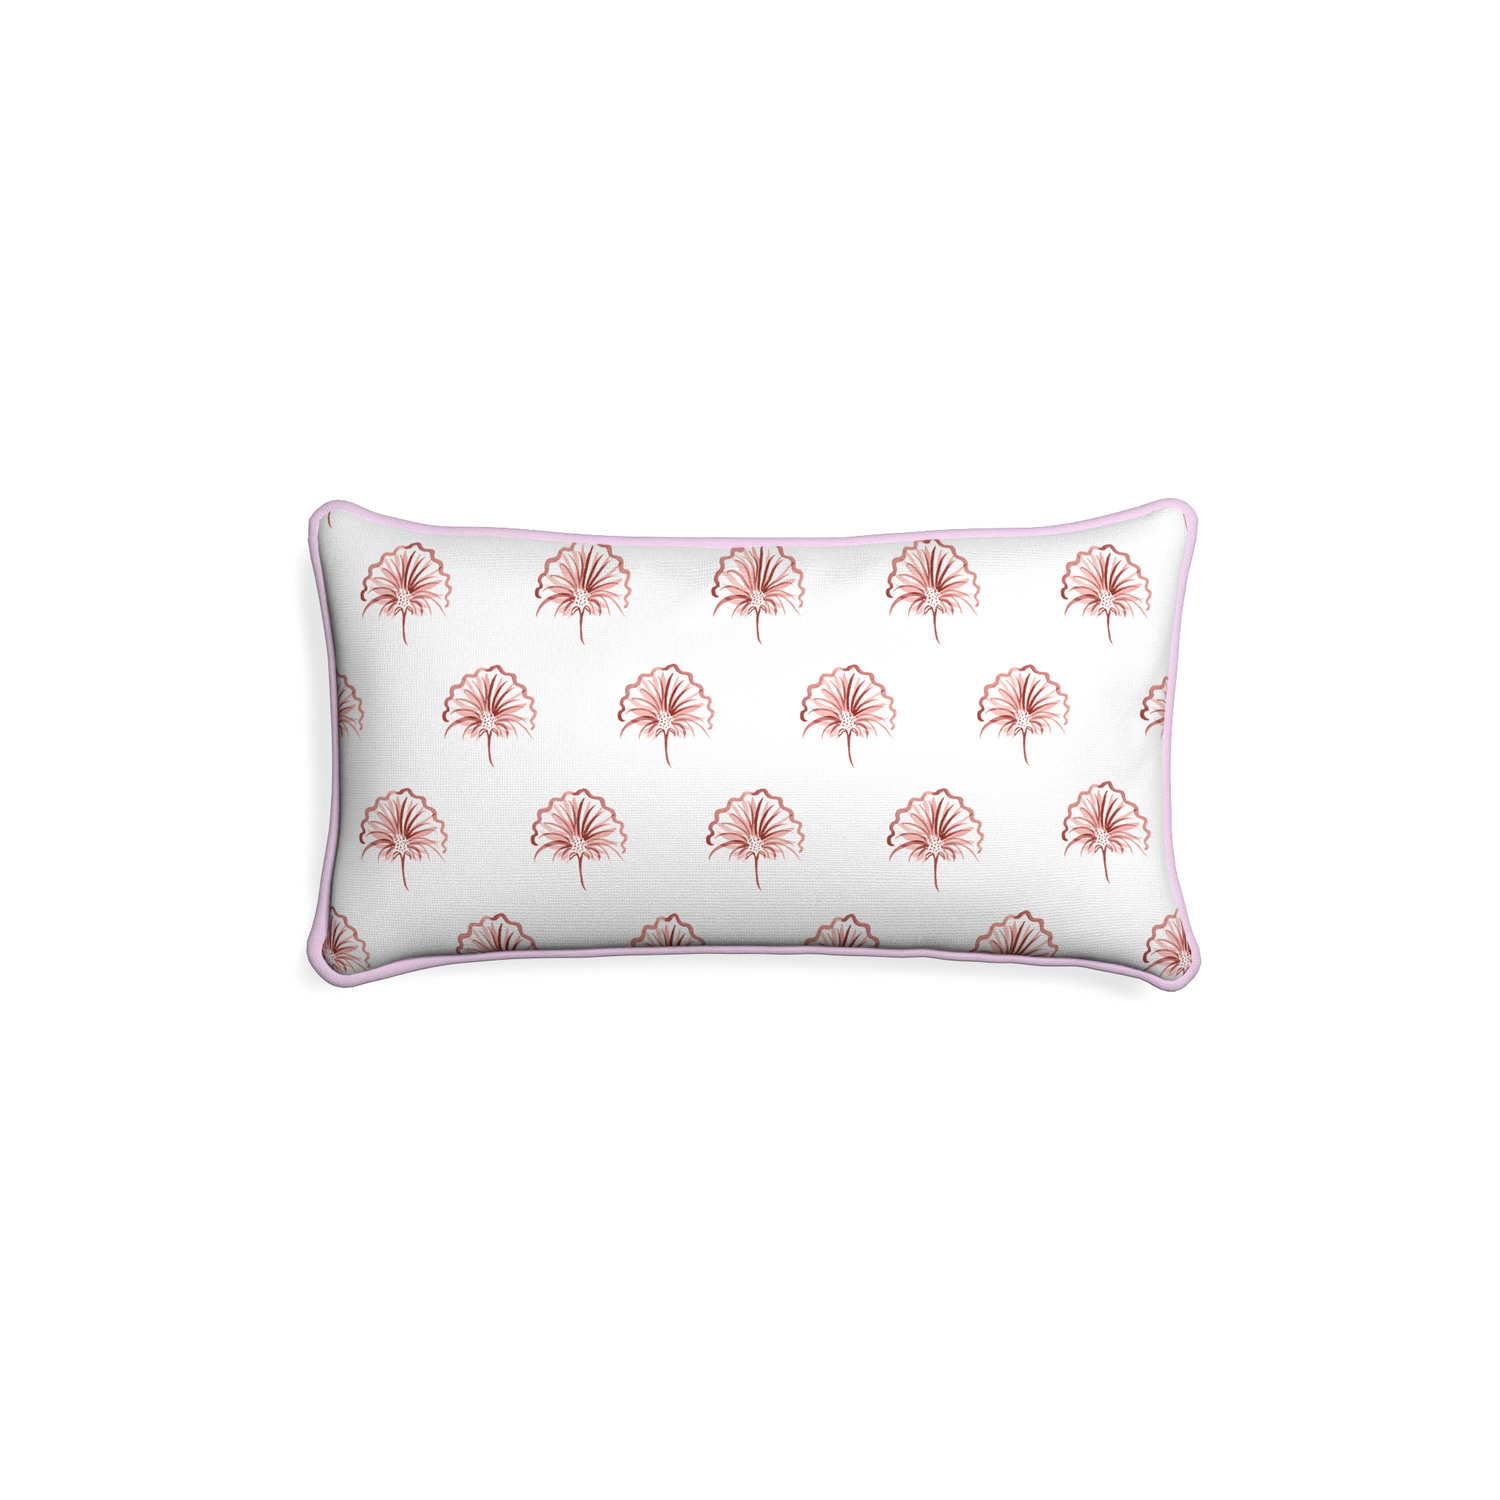 Petite-lumbar penelope rose custom floral pinkpillow with l piping on white background